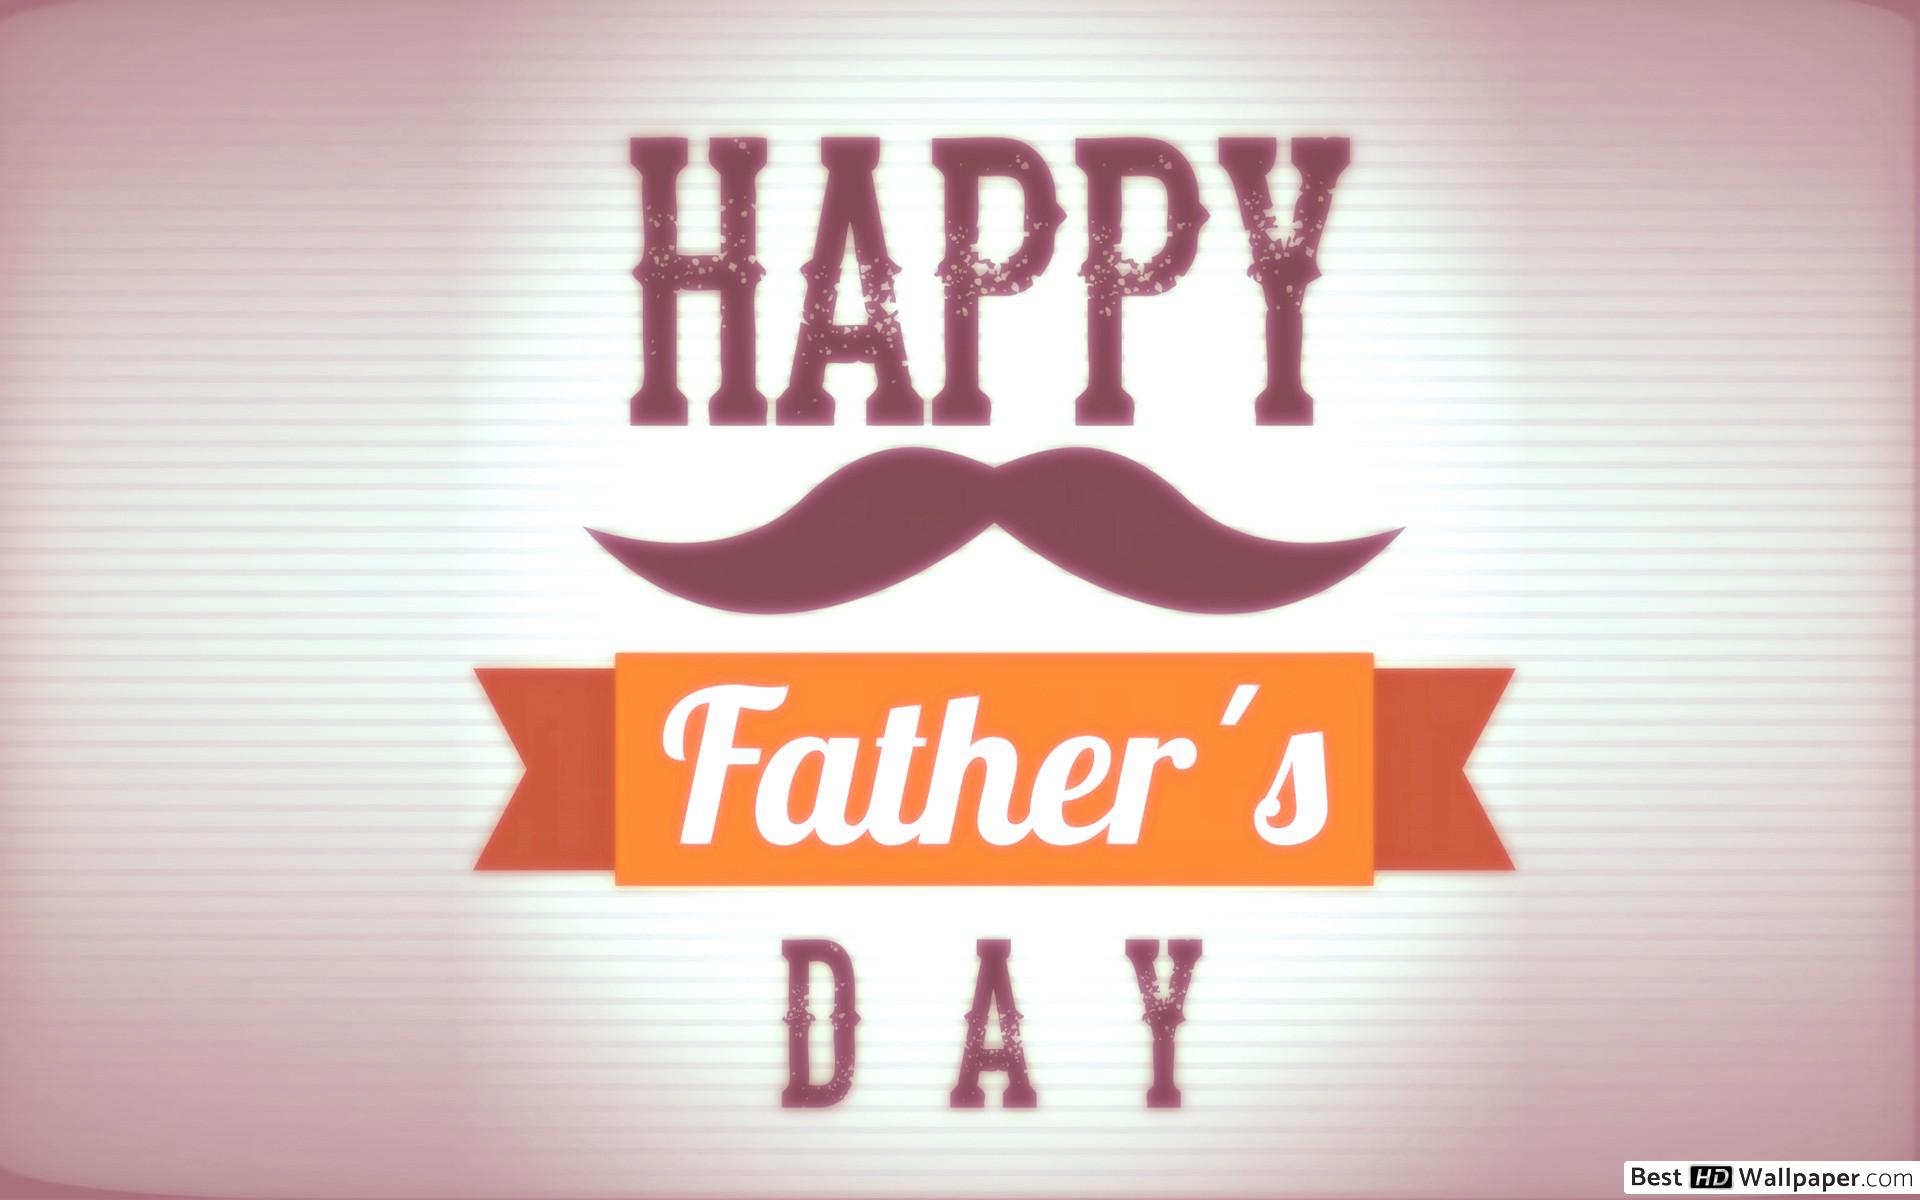 Happy Fathers Day 2017 - HD Wallpaper 